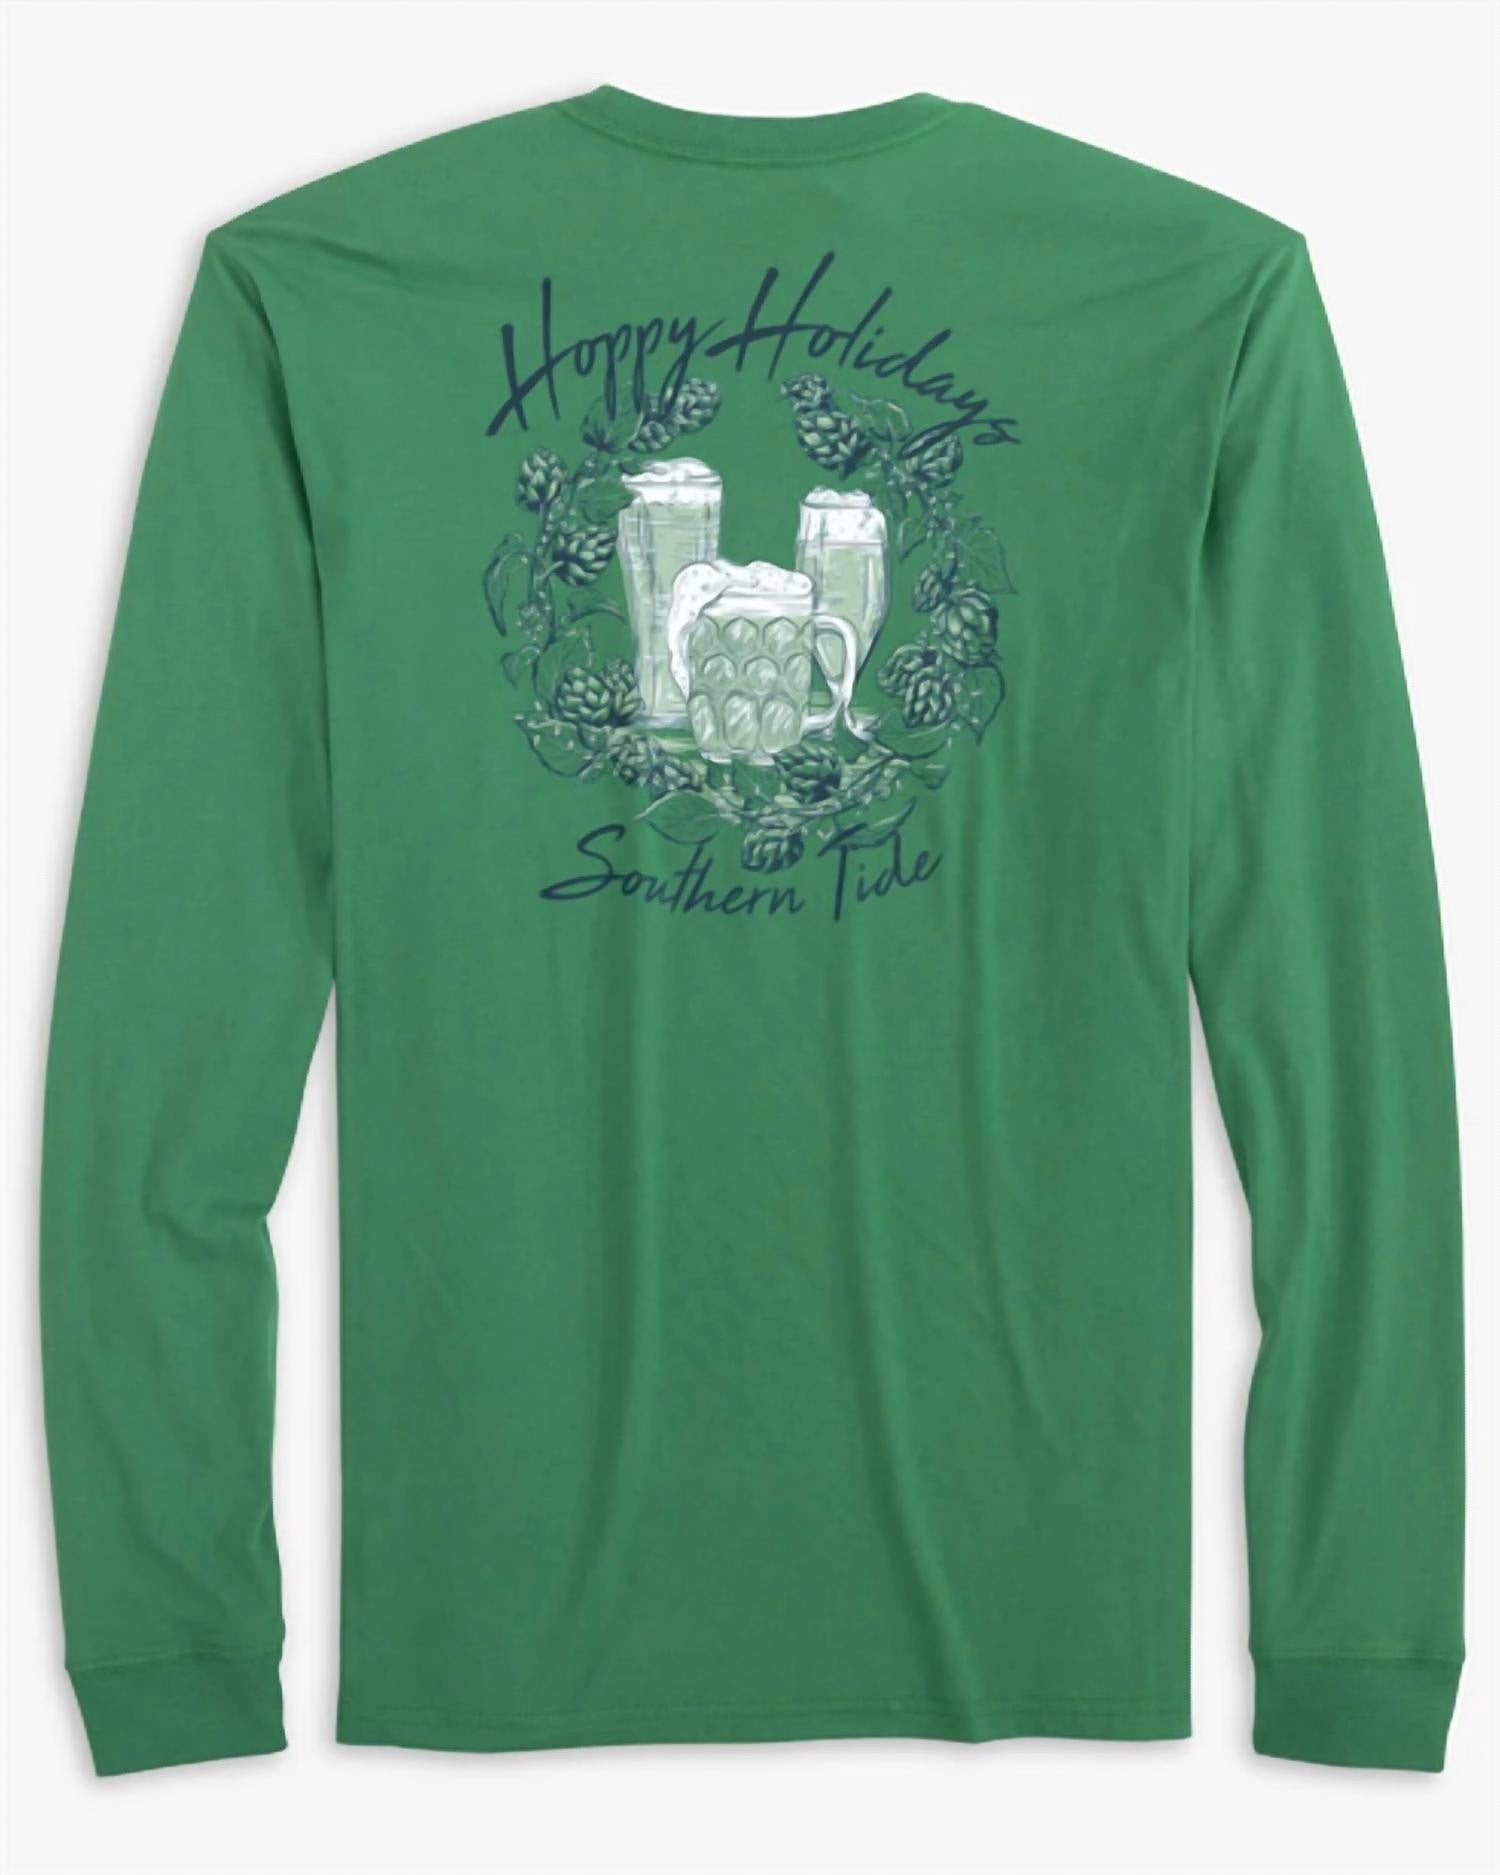 Shop Southern Tide Hoppy Holidays Long Sleeve T-shirt In Green